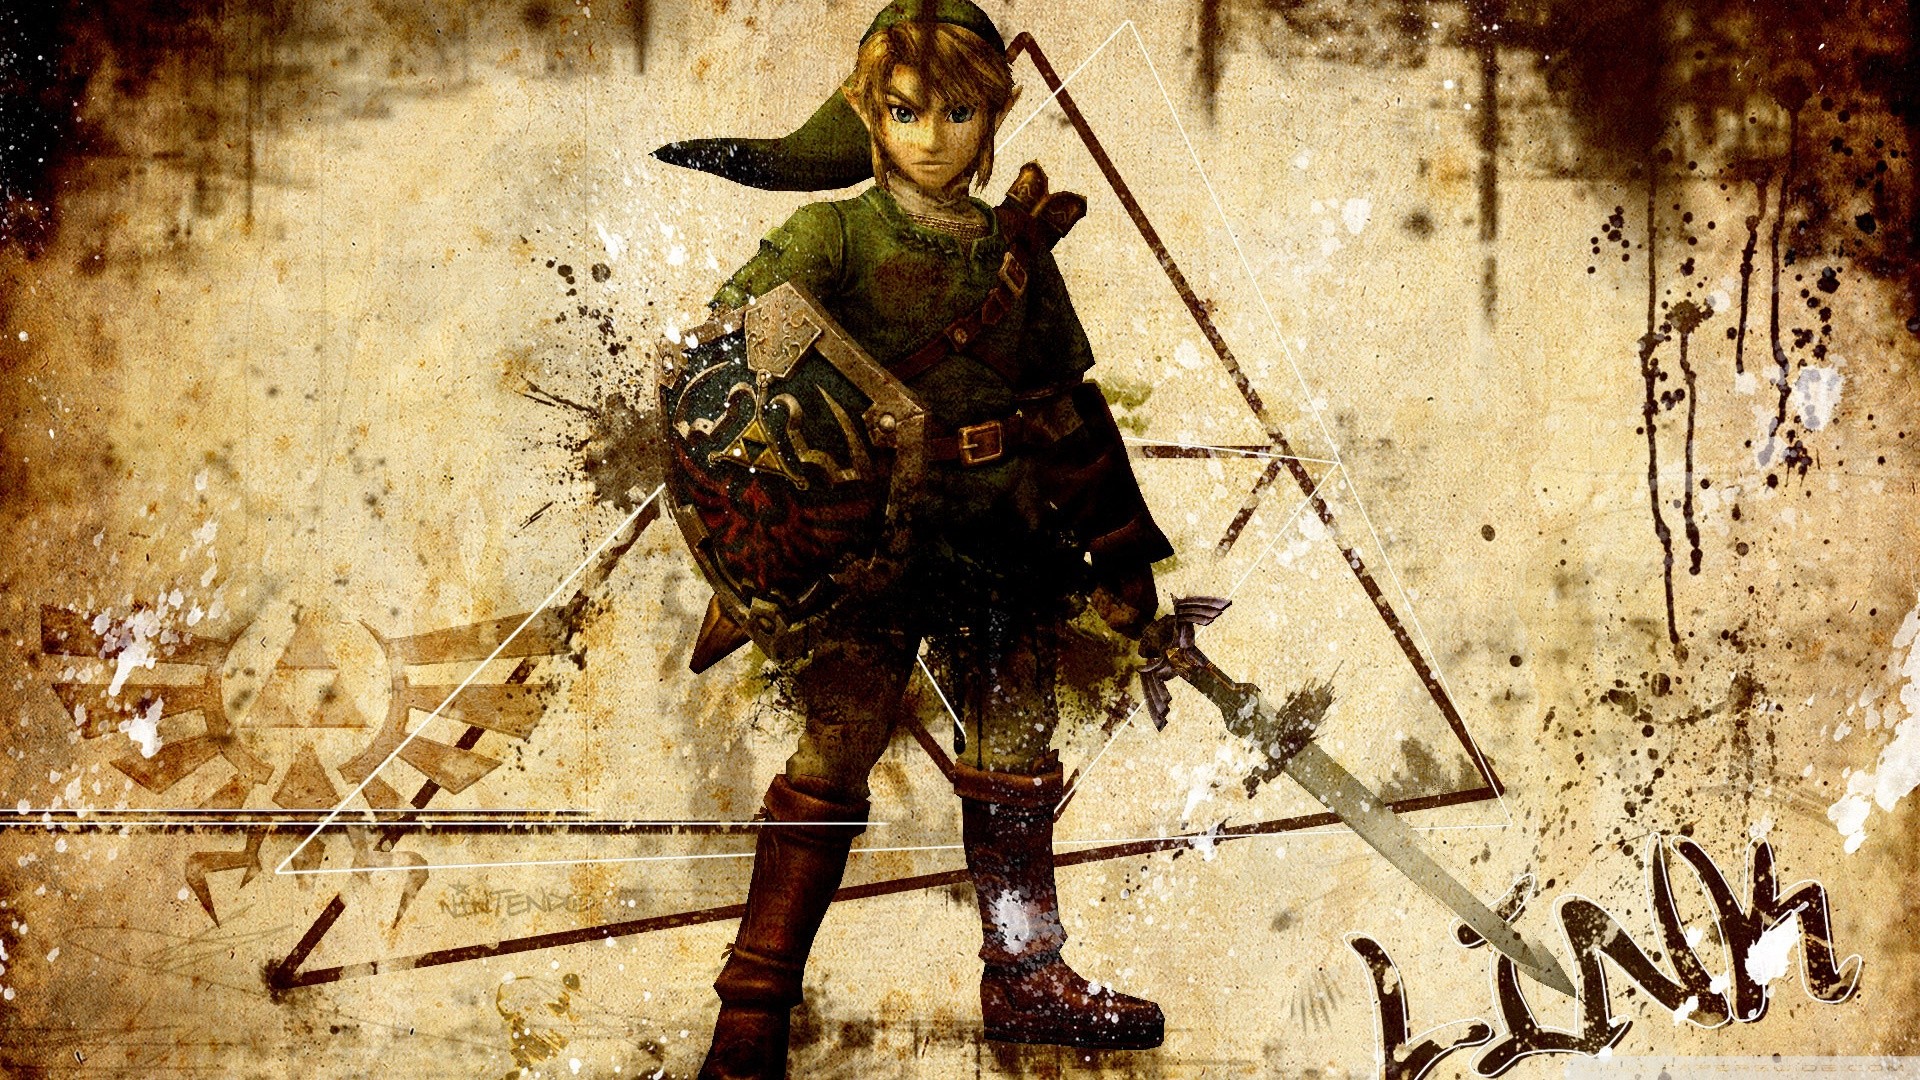 General 1920x1080 The Legend of Zelda Link Triforce Master Sword video games Hylian Shield video game characters Nintendo